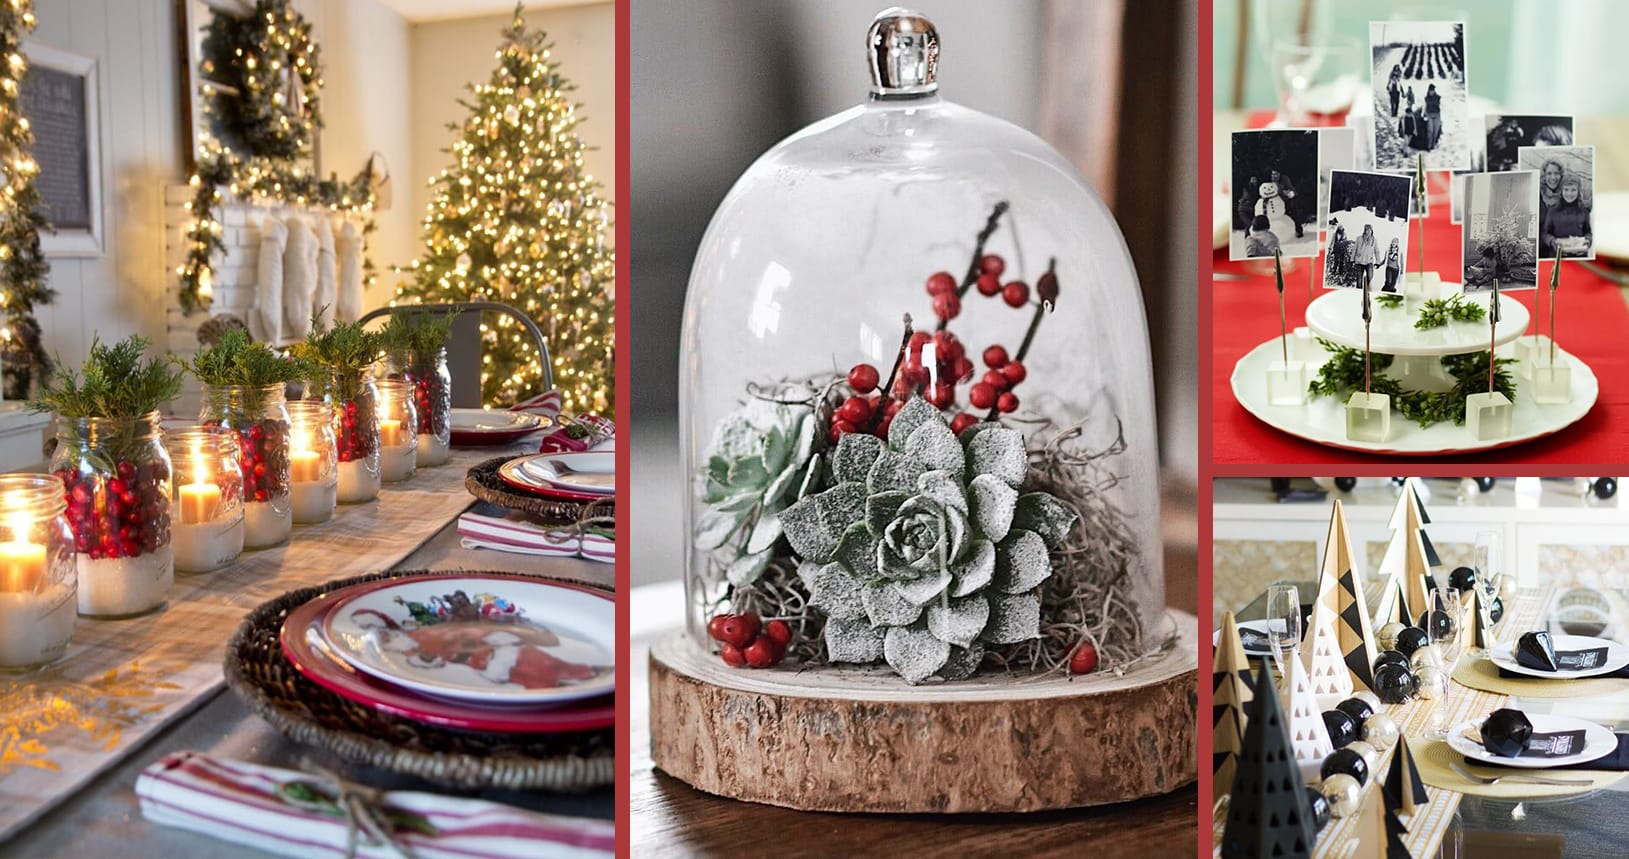 Fun, Festive and Easy Holiday Centerpiece Ideas